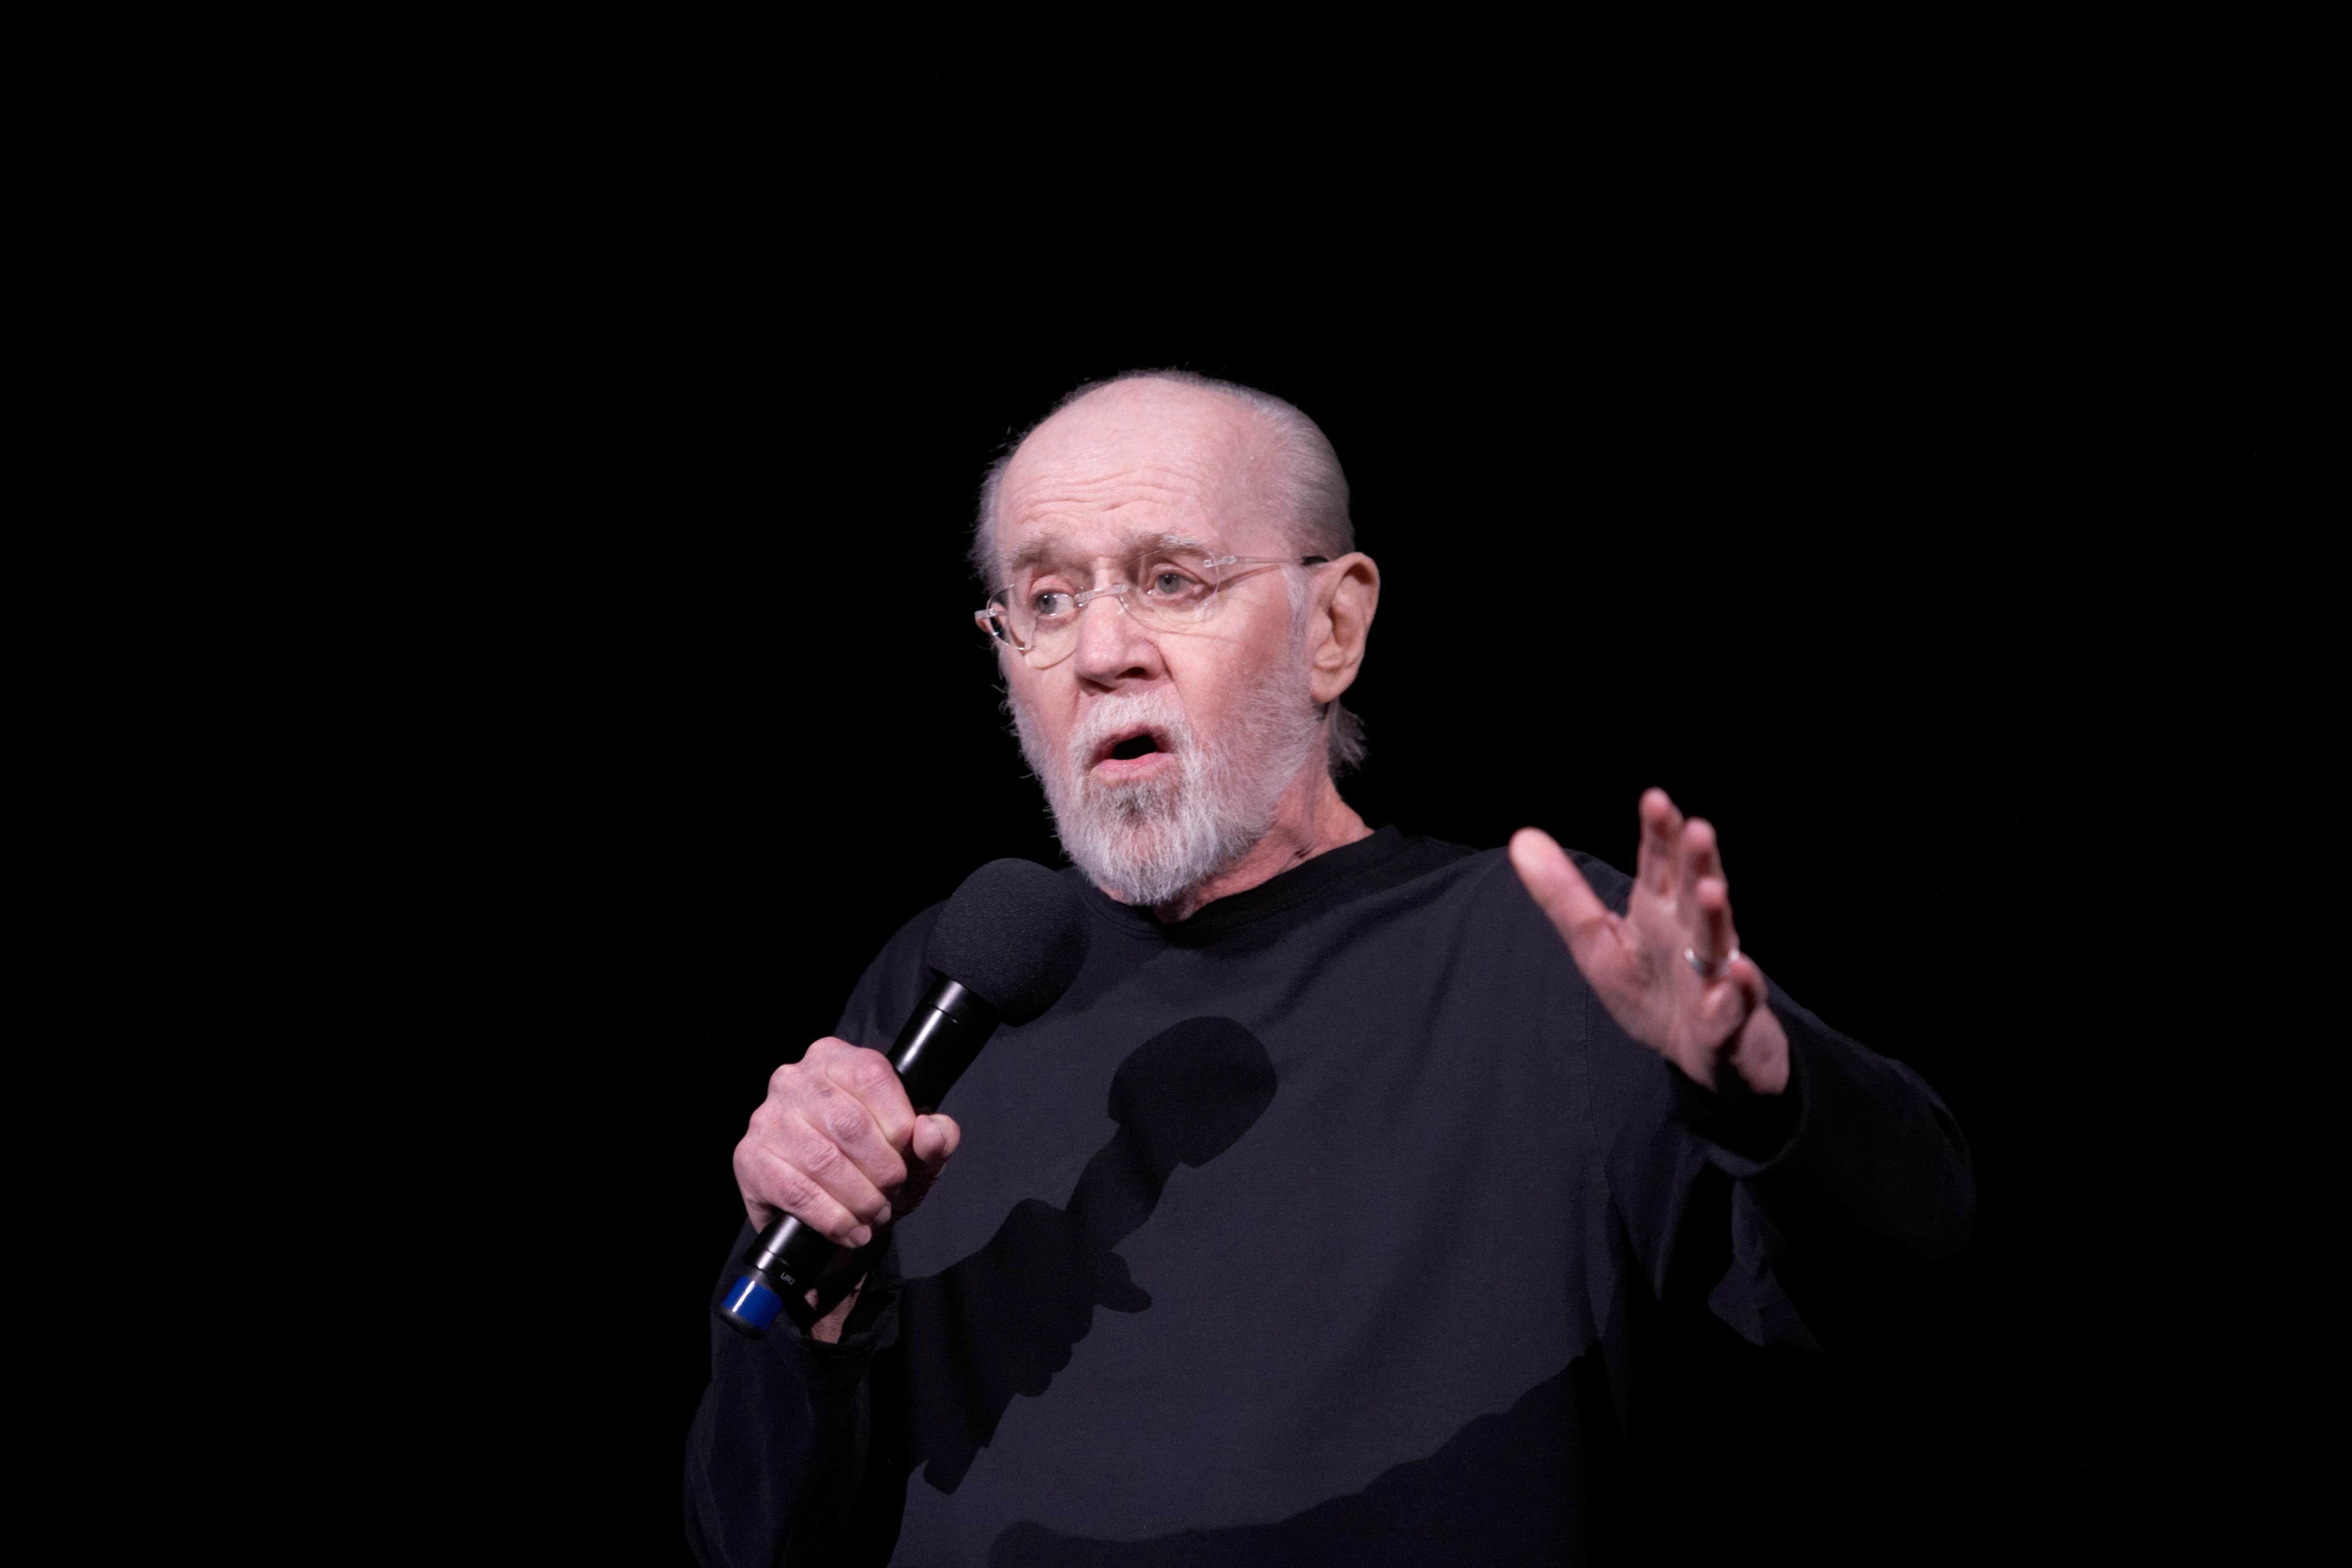 A look at George Carlin’s HBO documentary